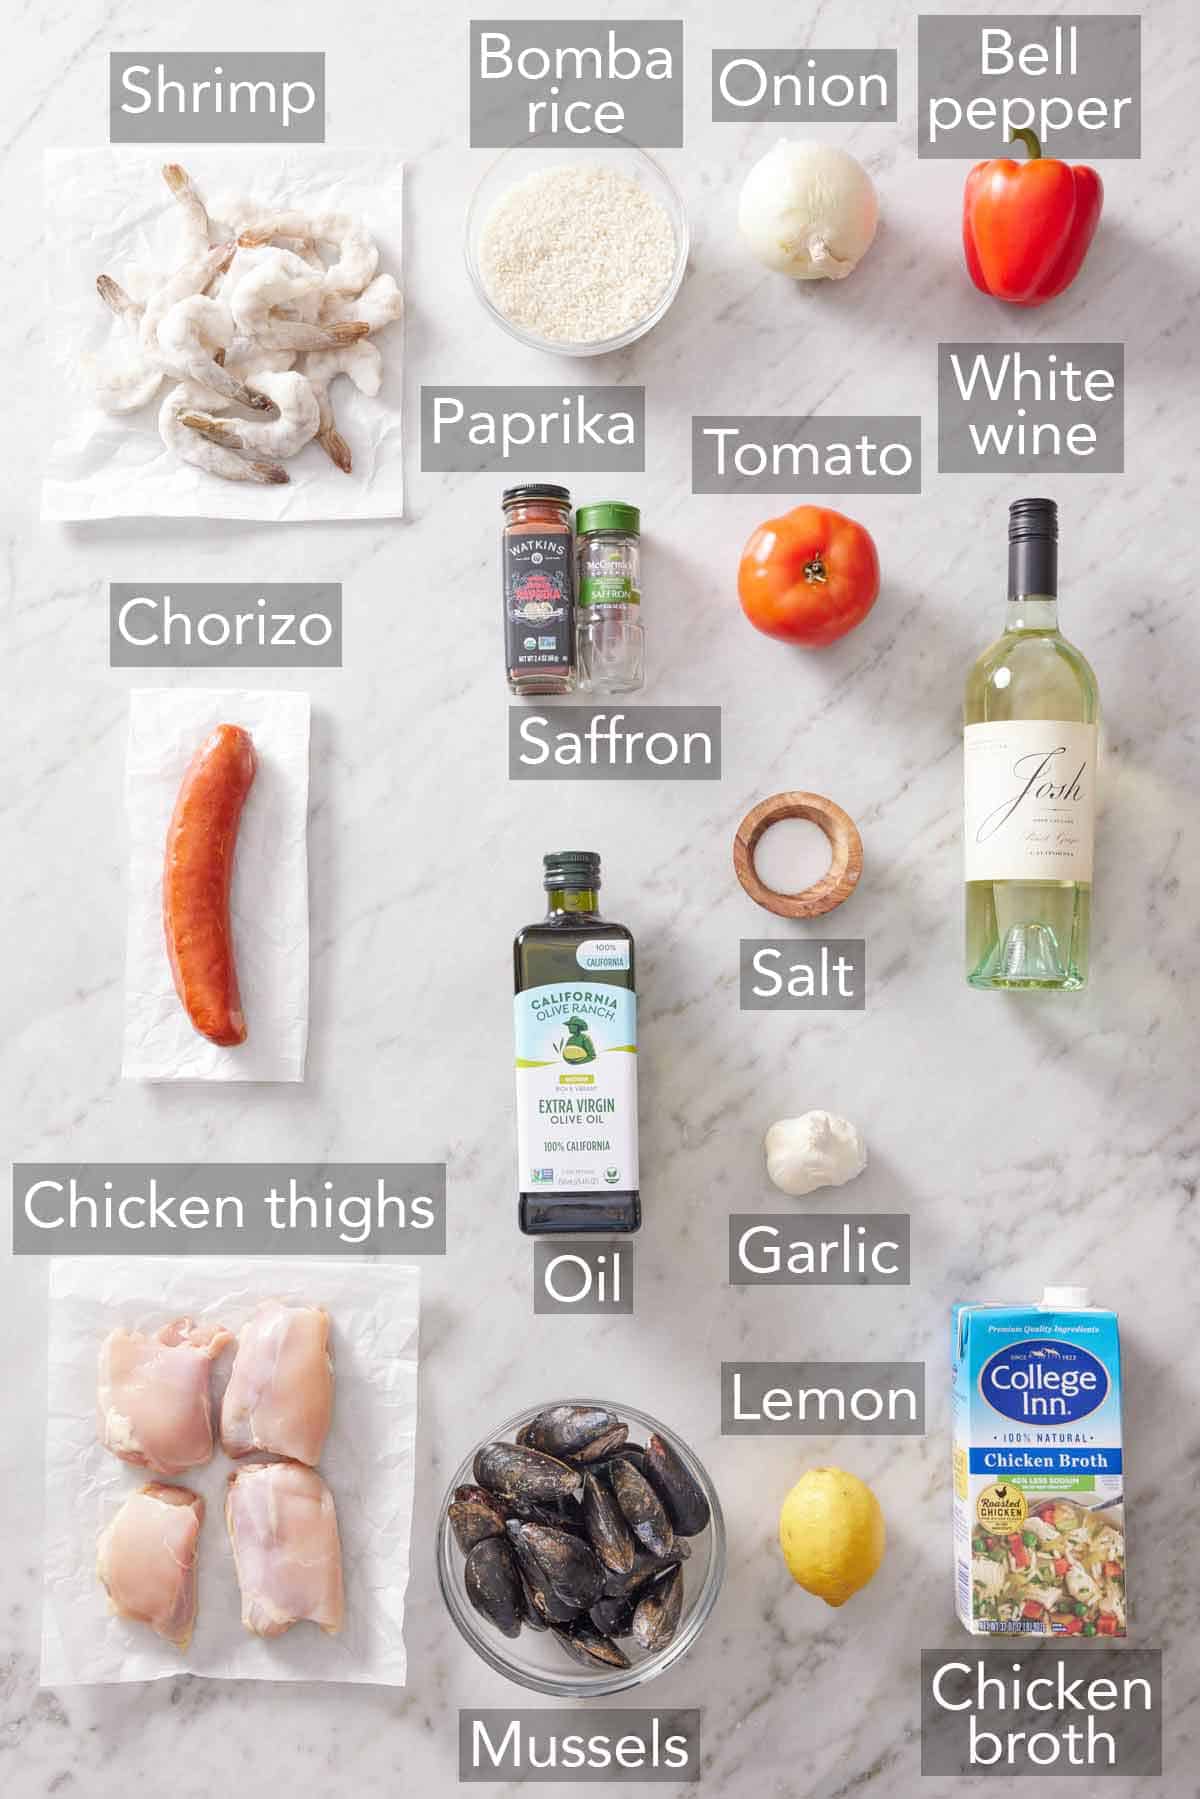 Ingredients needed to make paella.